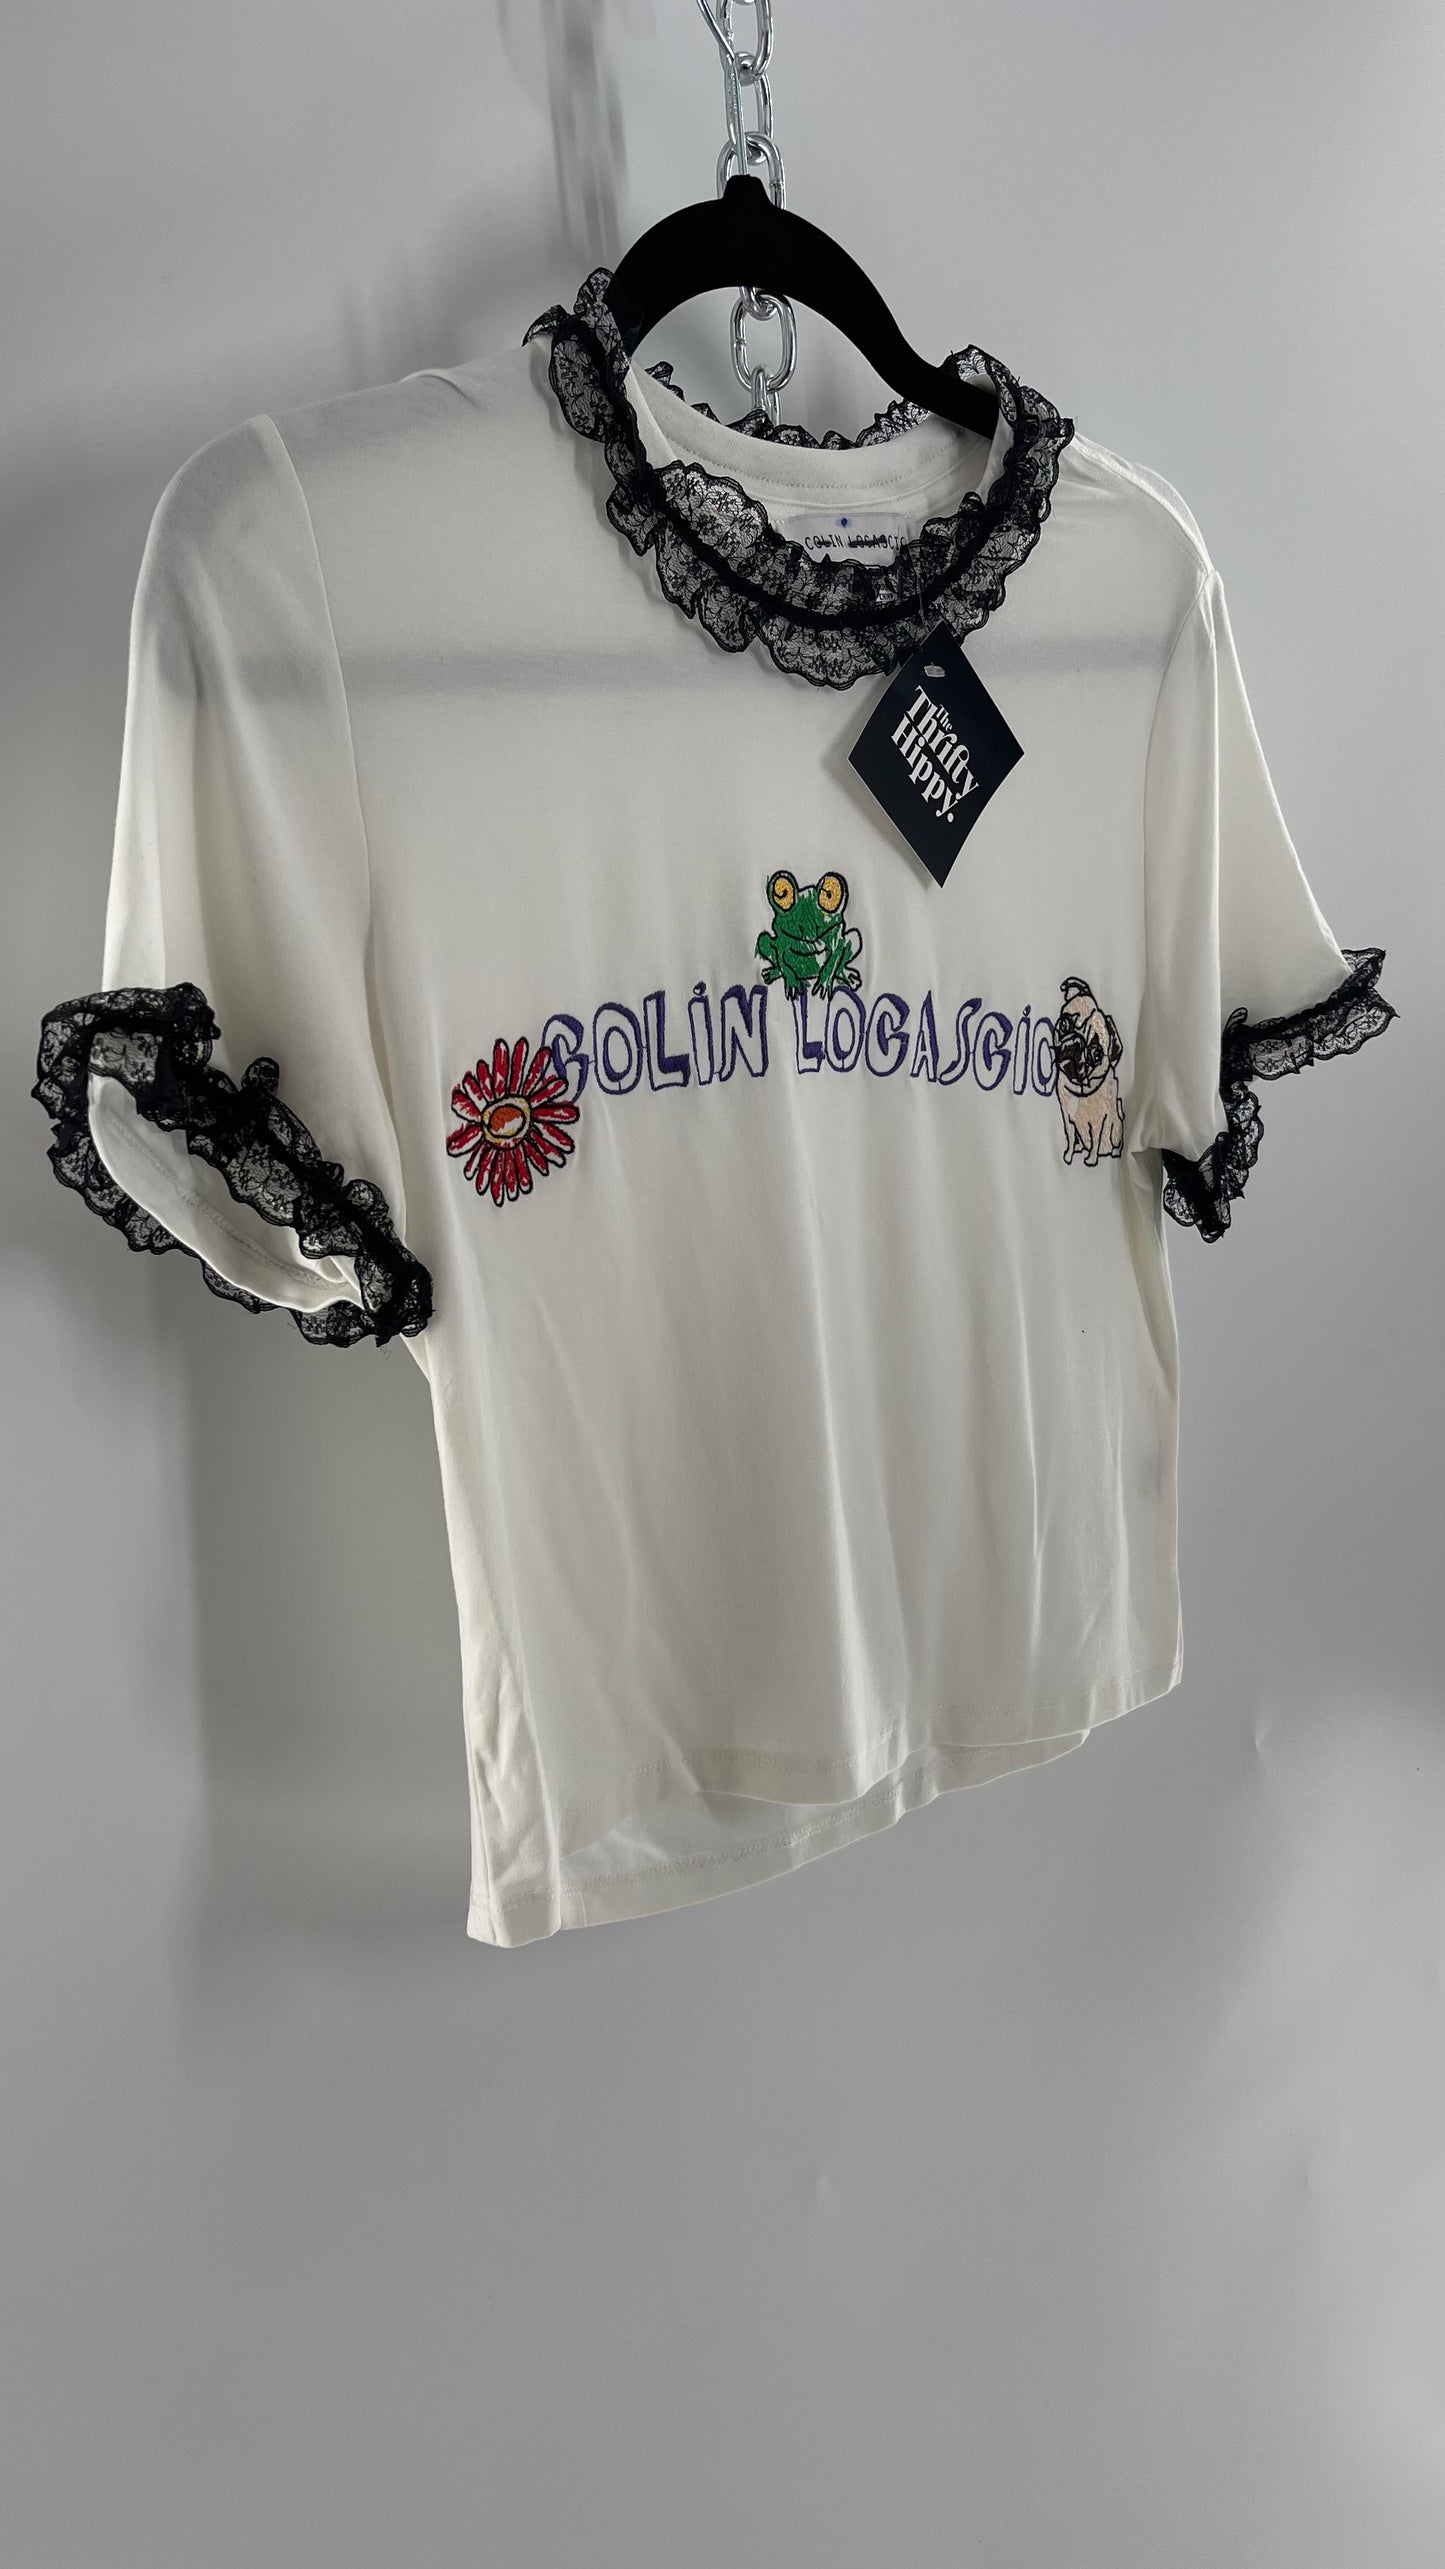 Colin Locascio Tannie T Shirt White Black Lace Ruffle Sleeves Frog Embroidery  (Small)